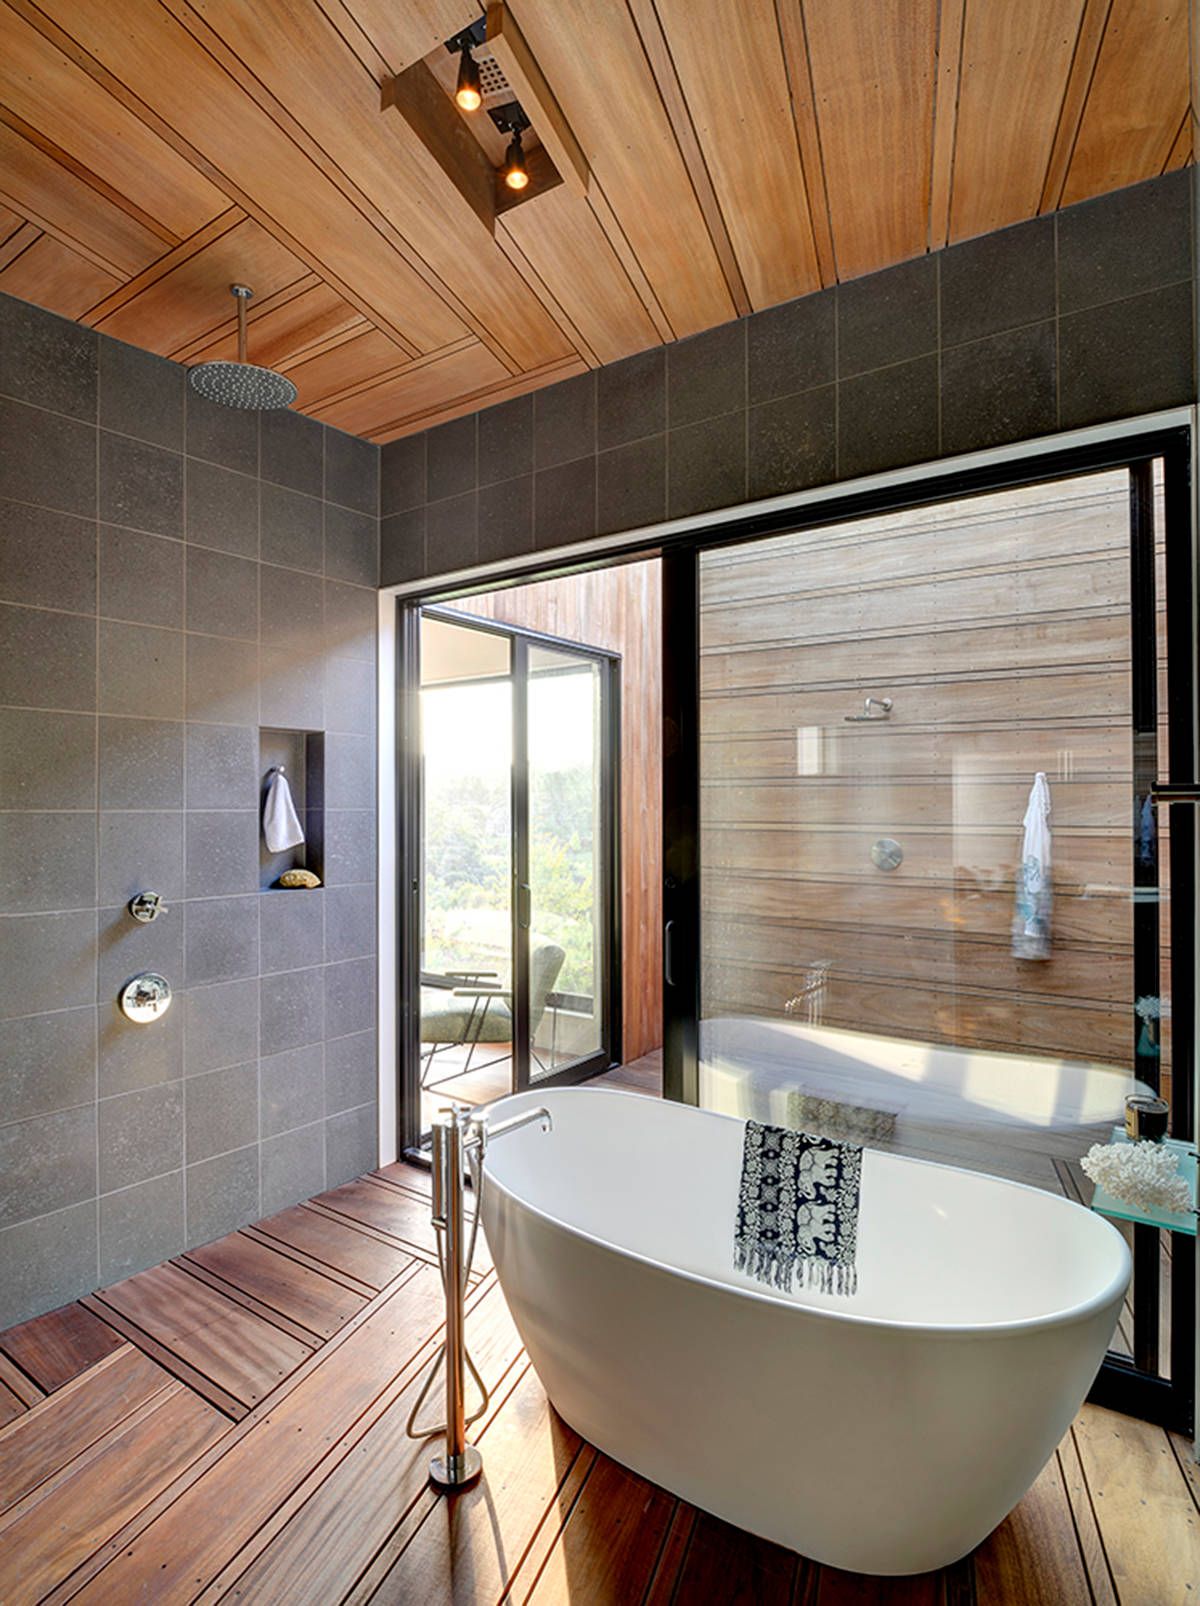 Modern bathroom of New York home in gray and wood with freestanding bathtub and rainfall shower